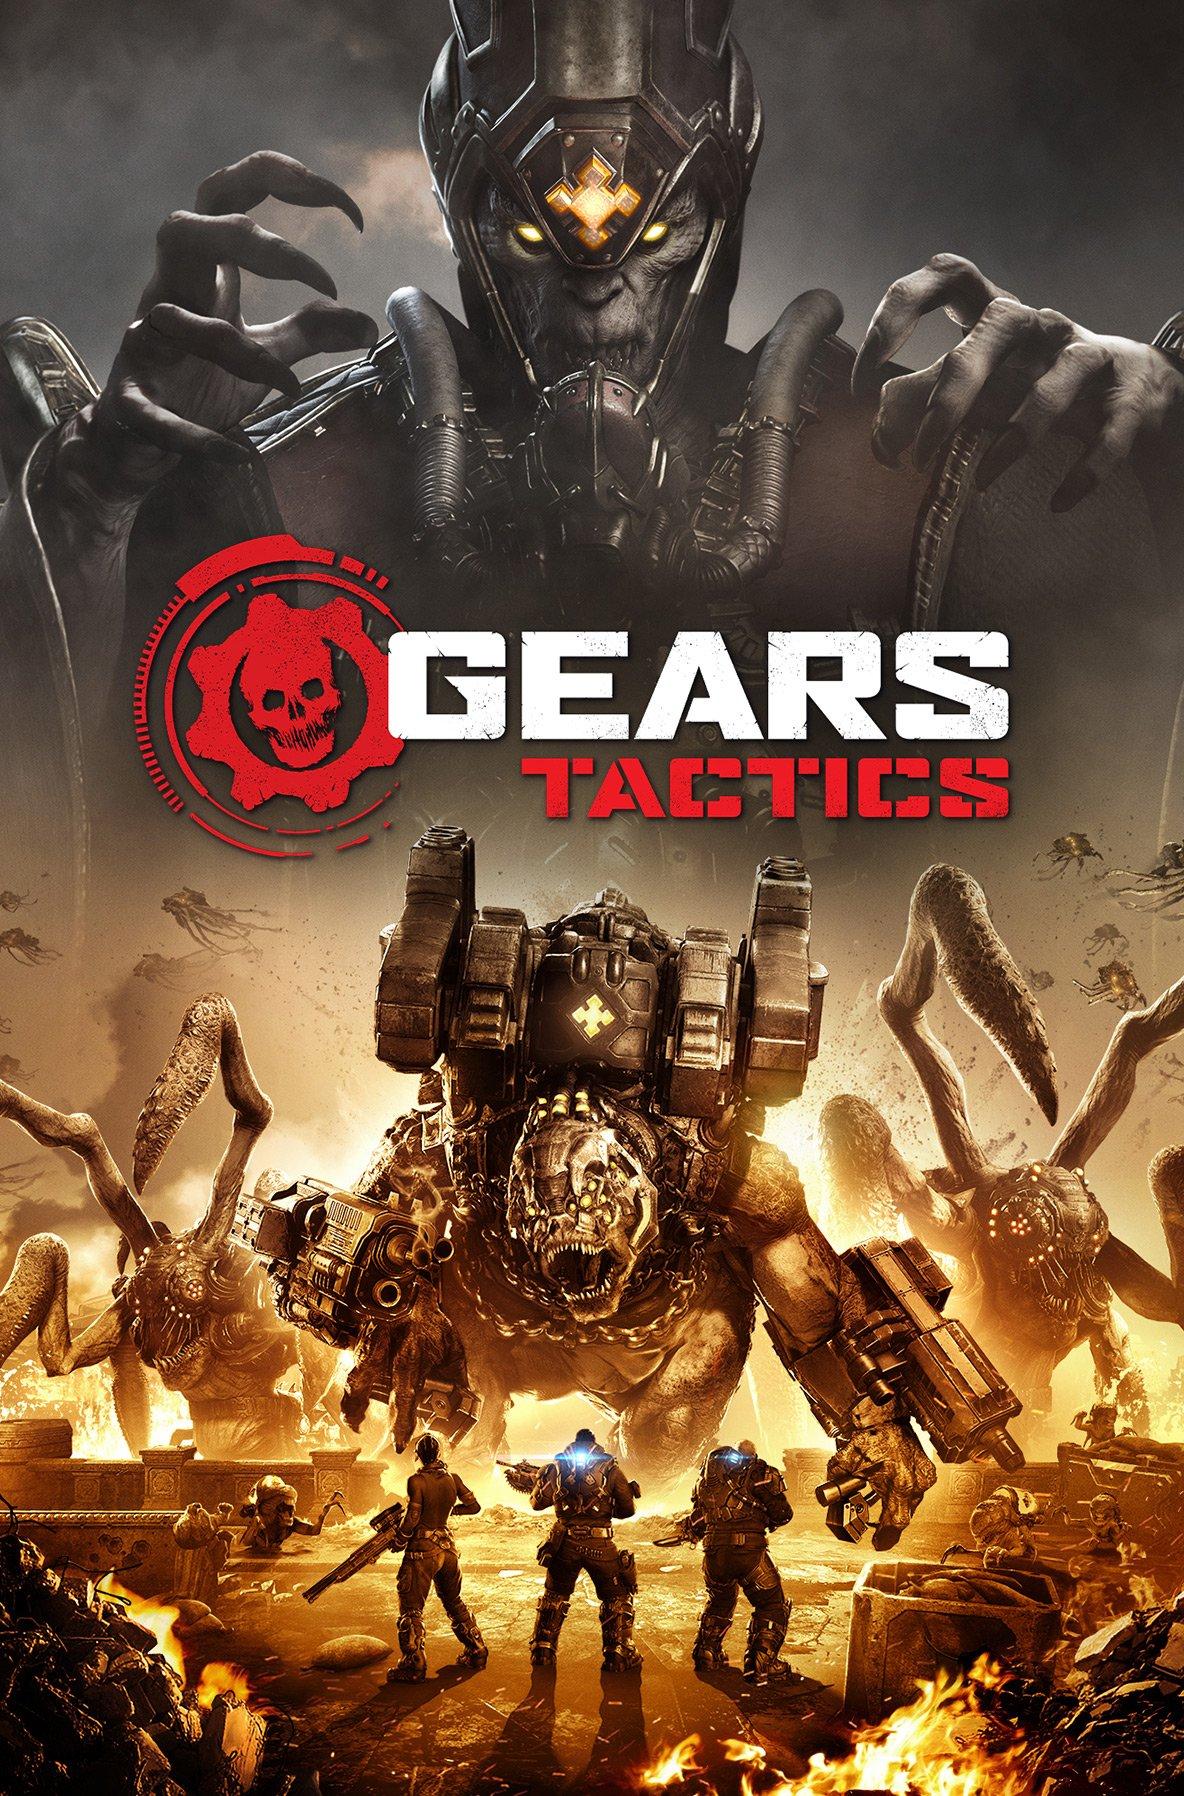 Gears of war 2 still holds up. A remake would be brutal : r/XboxSeriesX